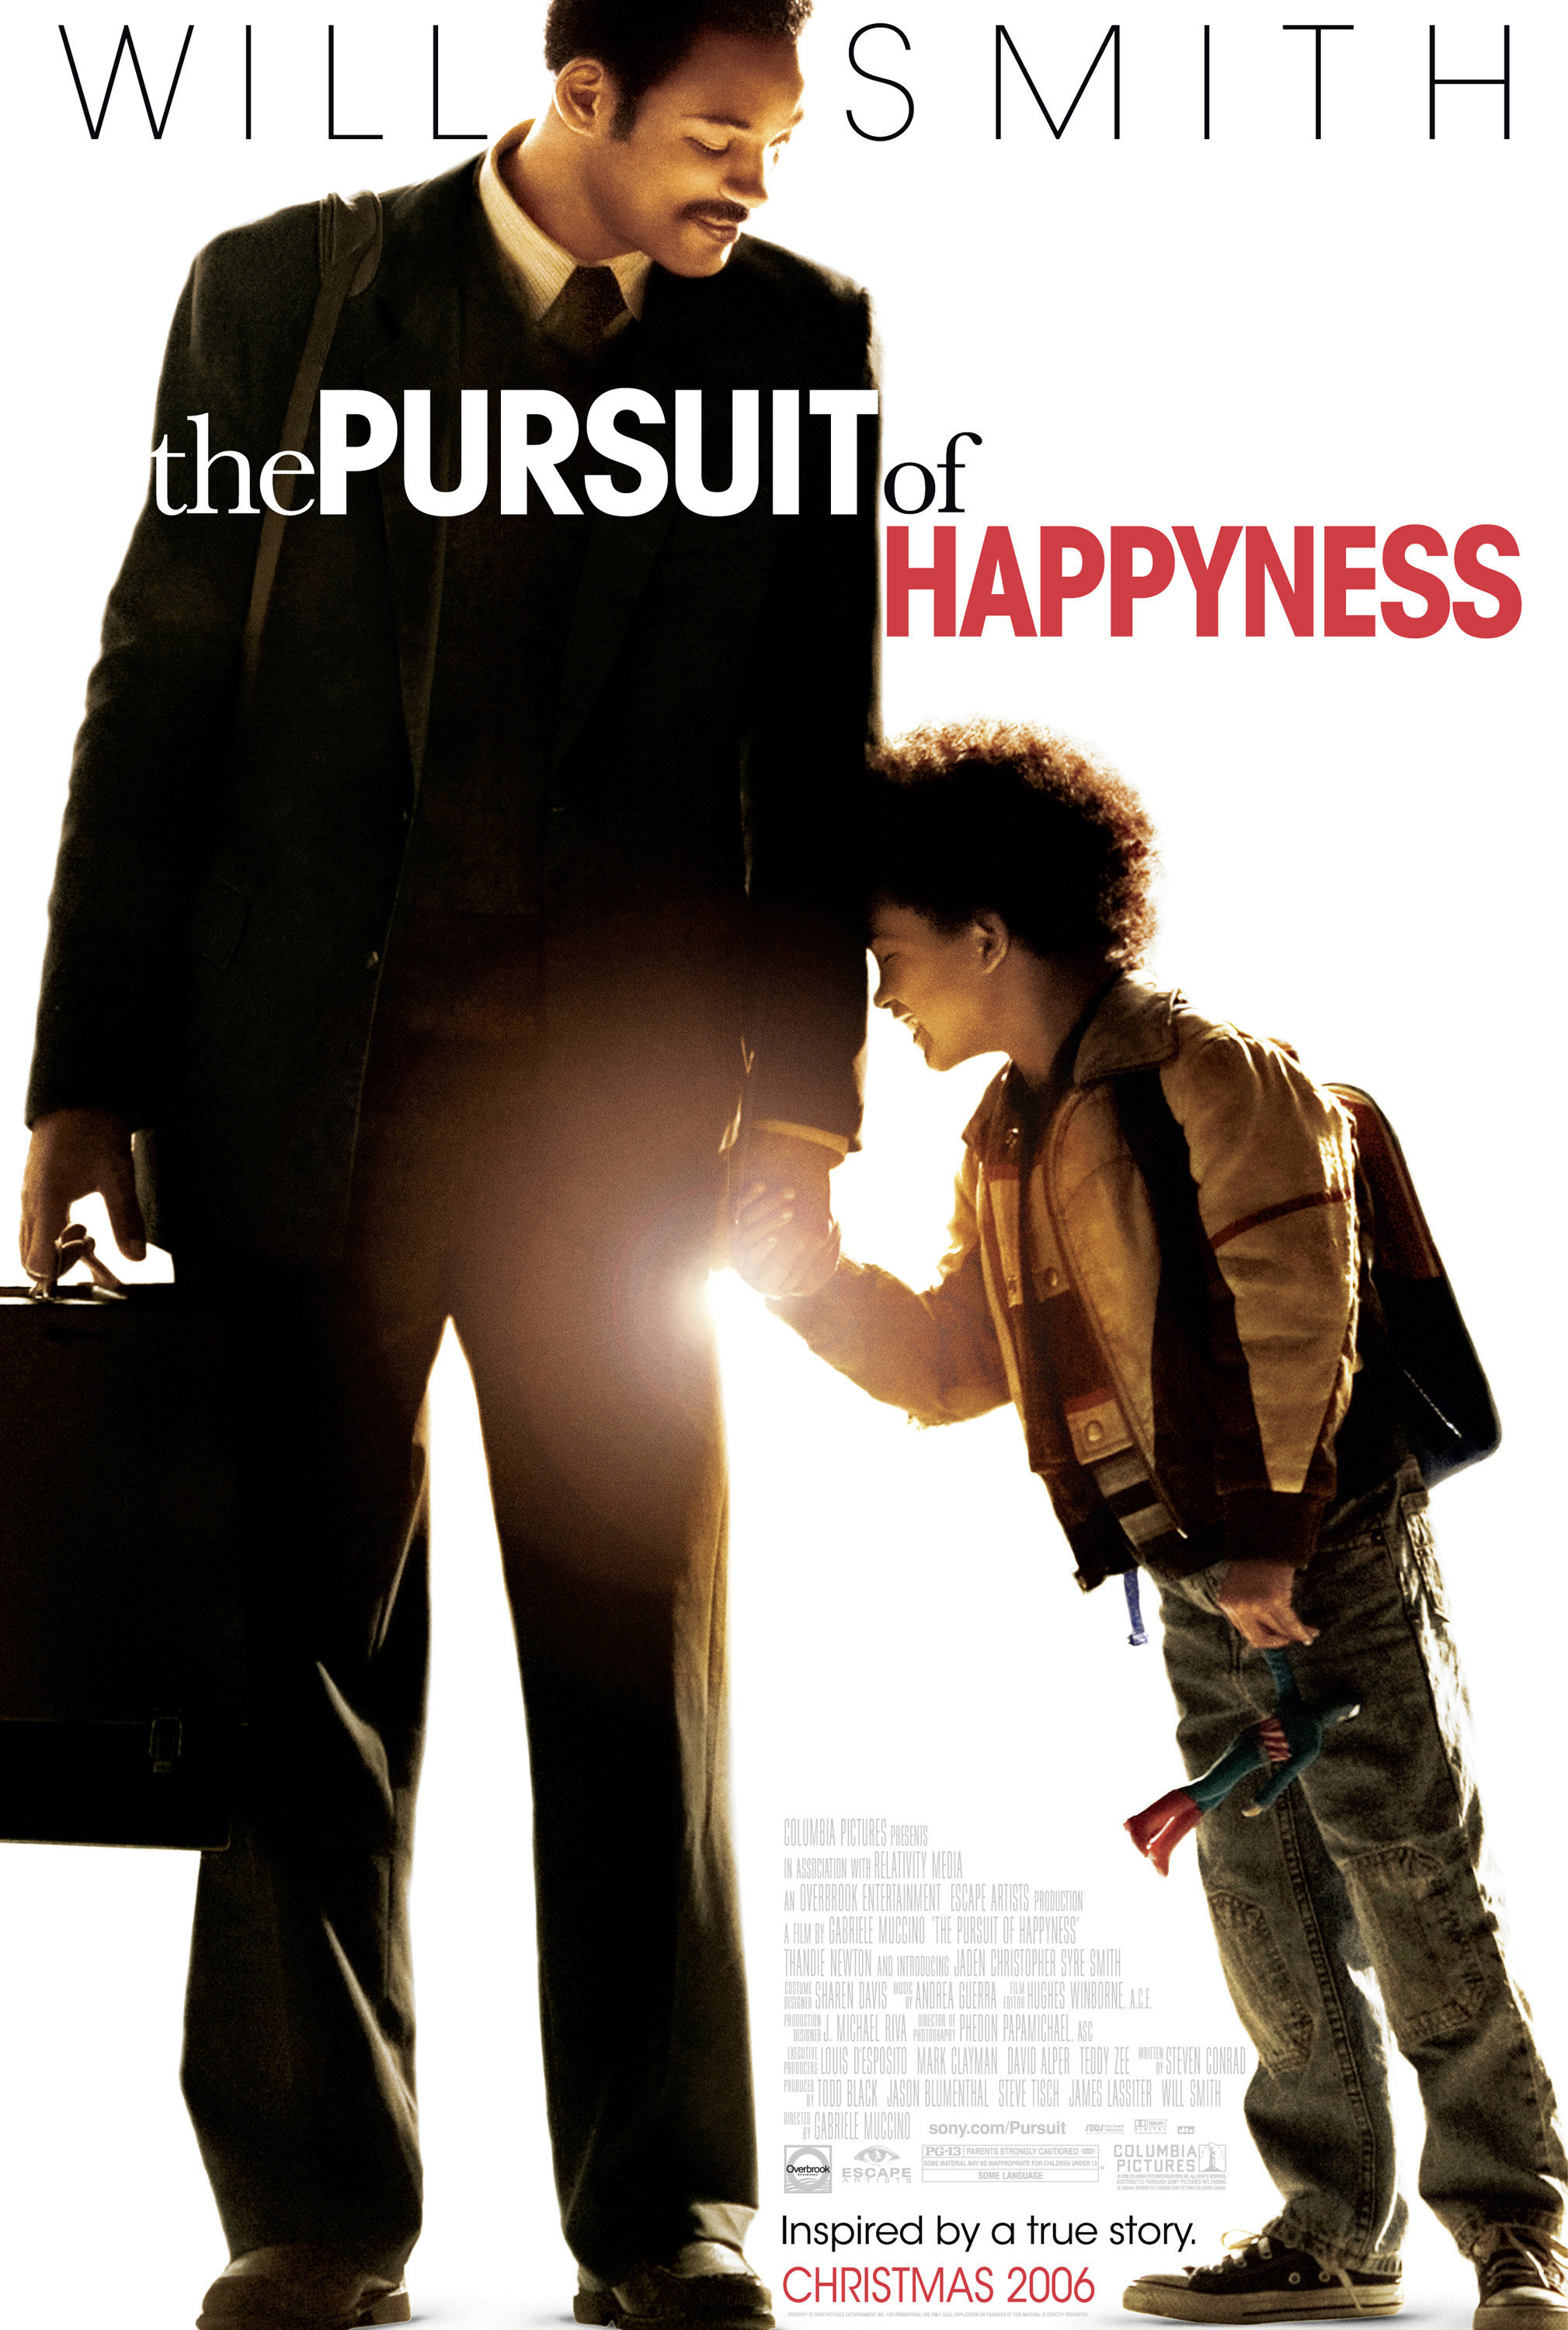 the pursuit of happyness film review essay